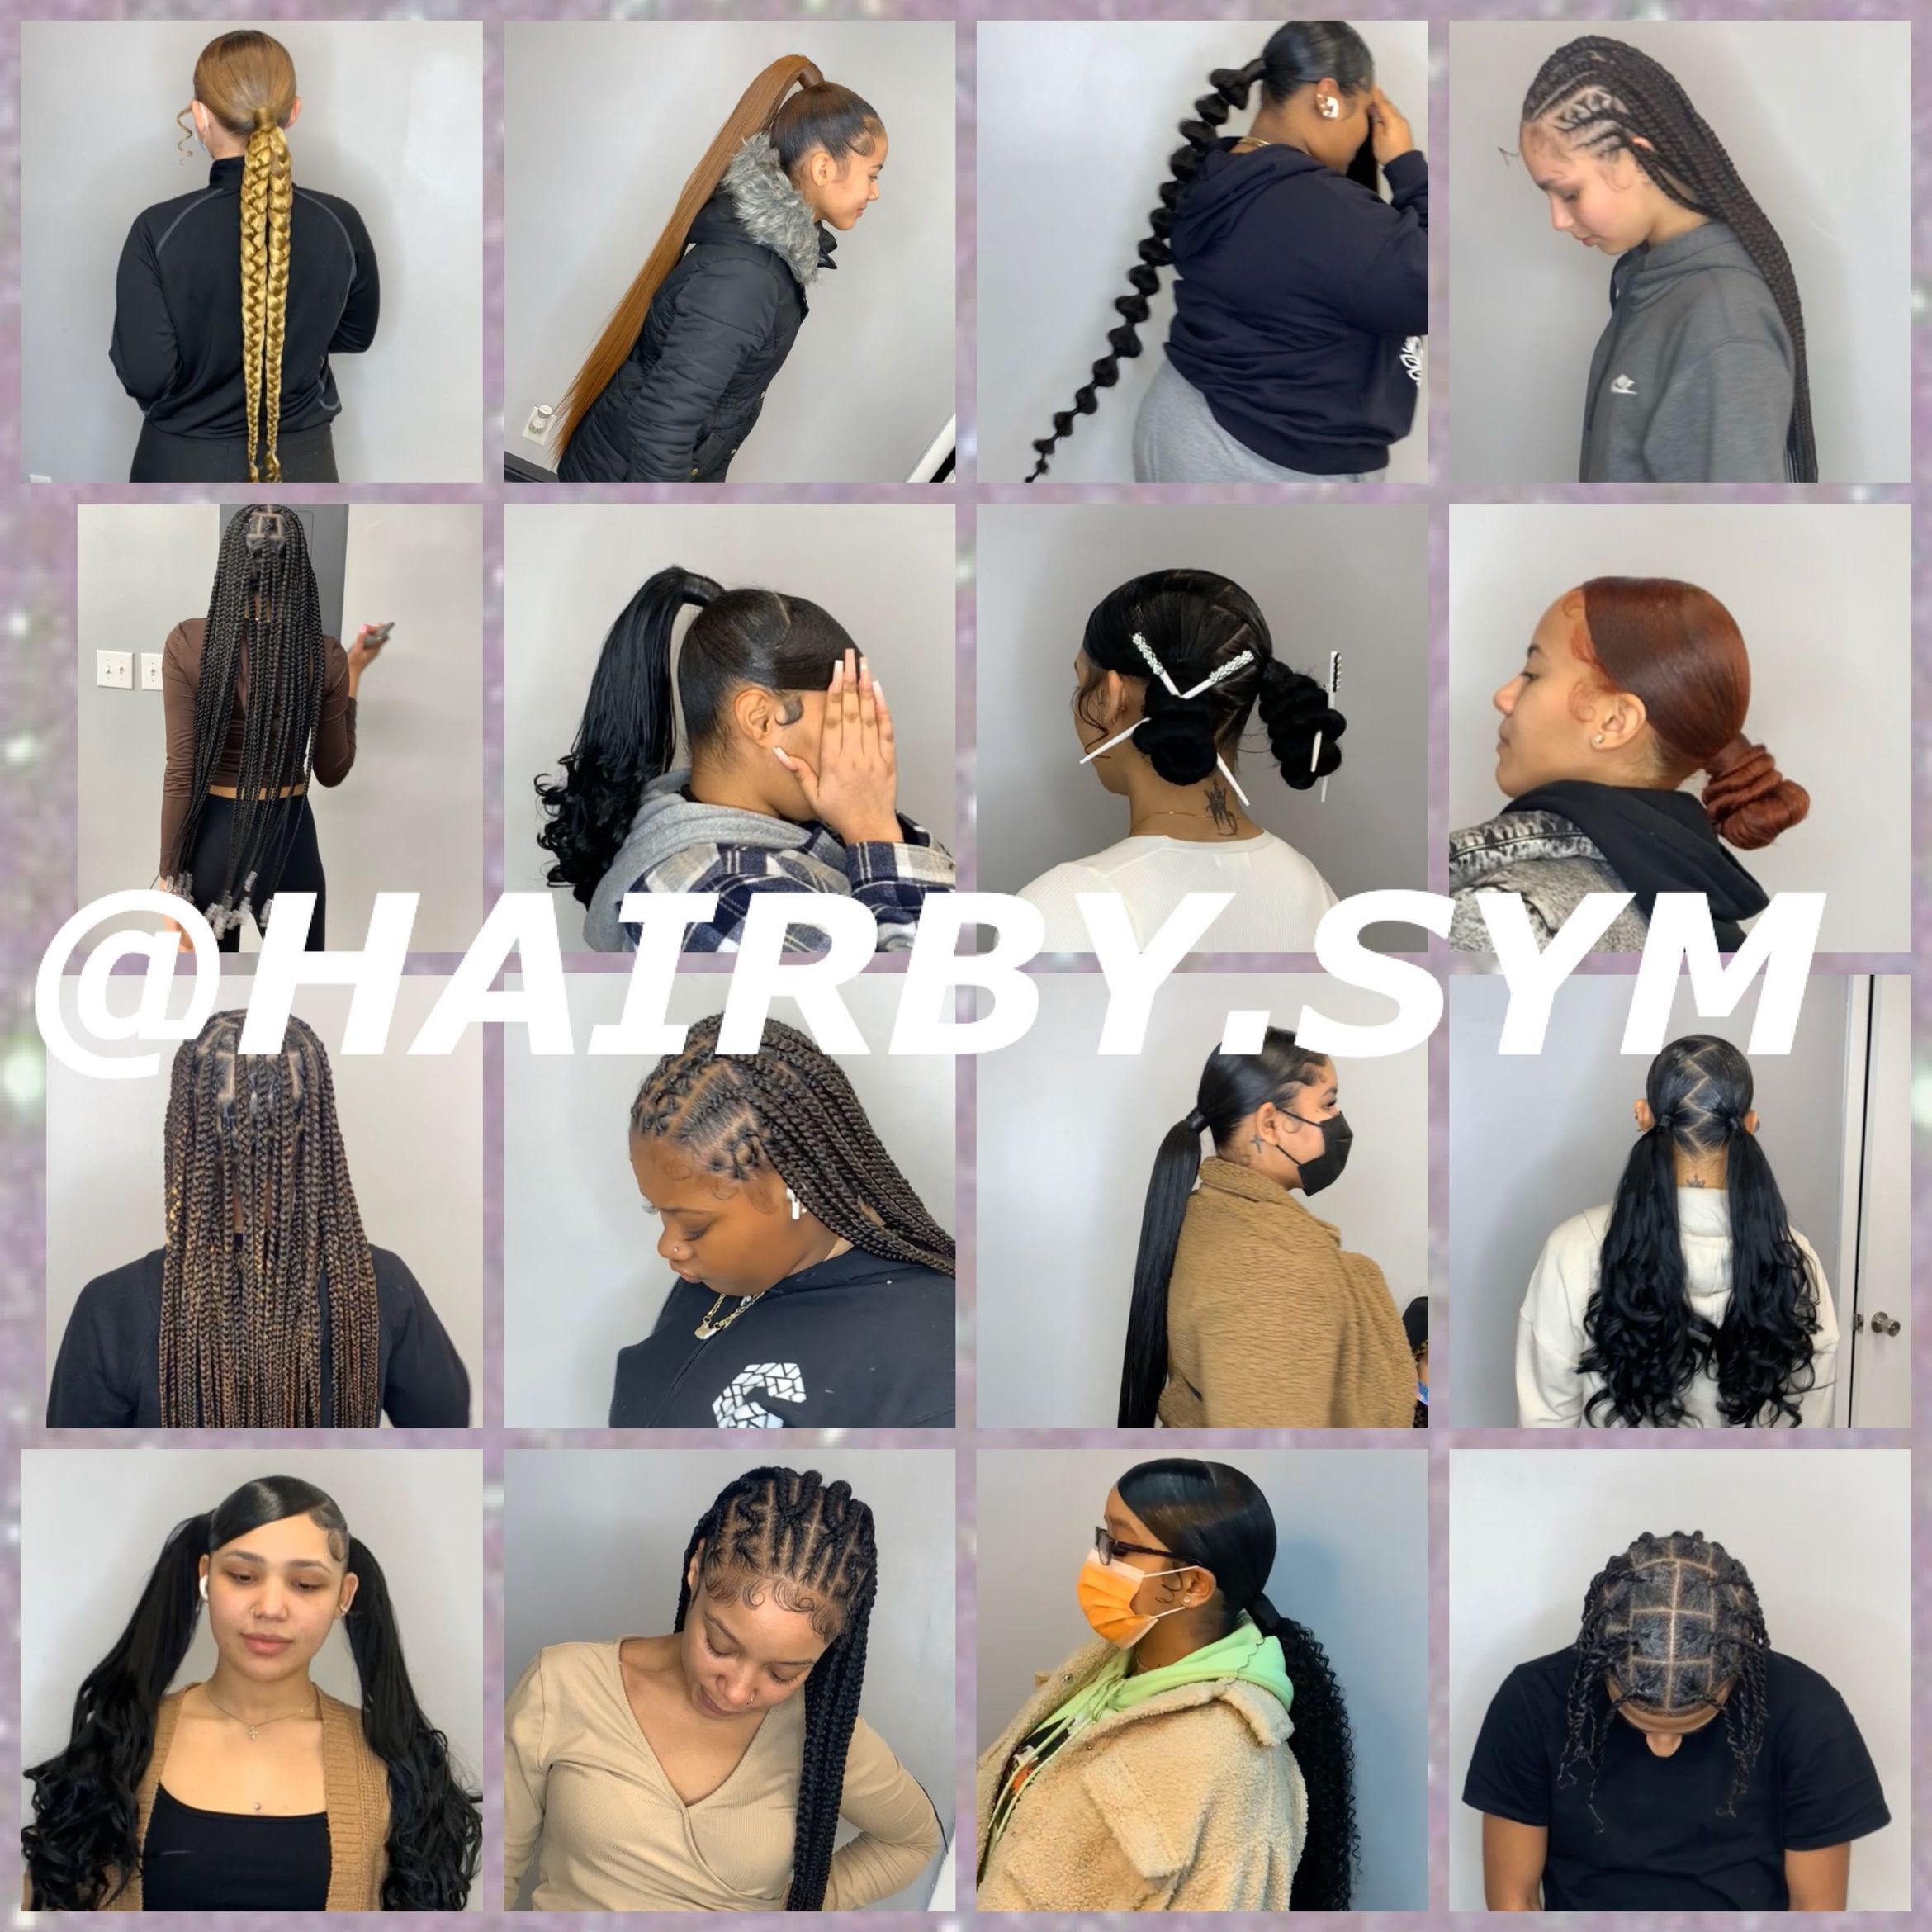 Hair By Sym, 400 Warwick ave, Providence, 02905